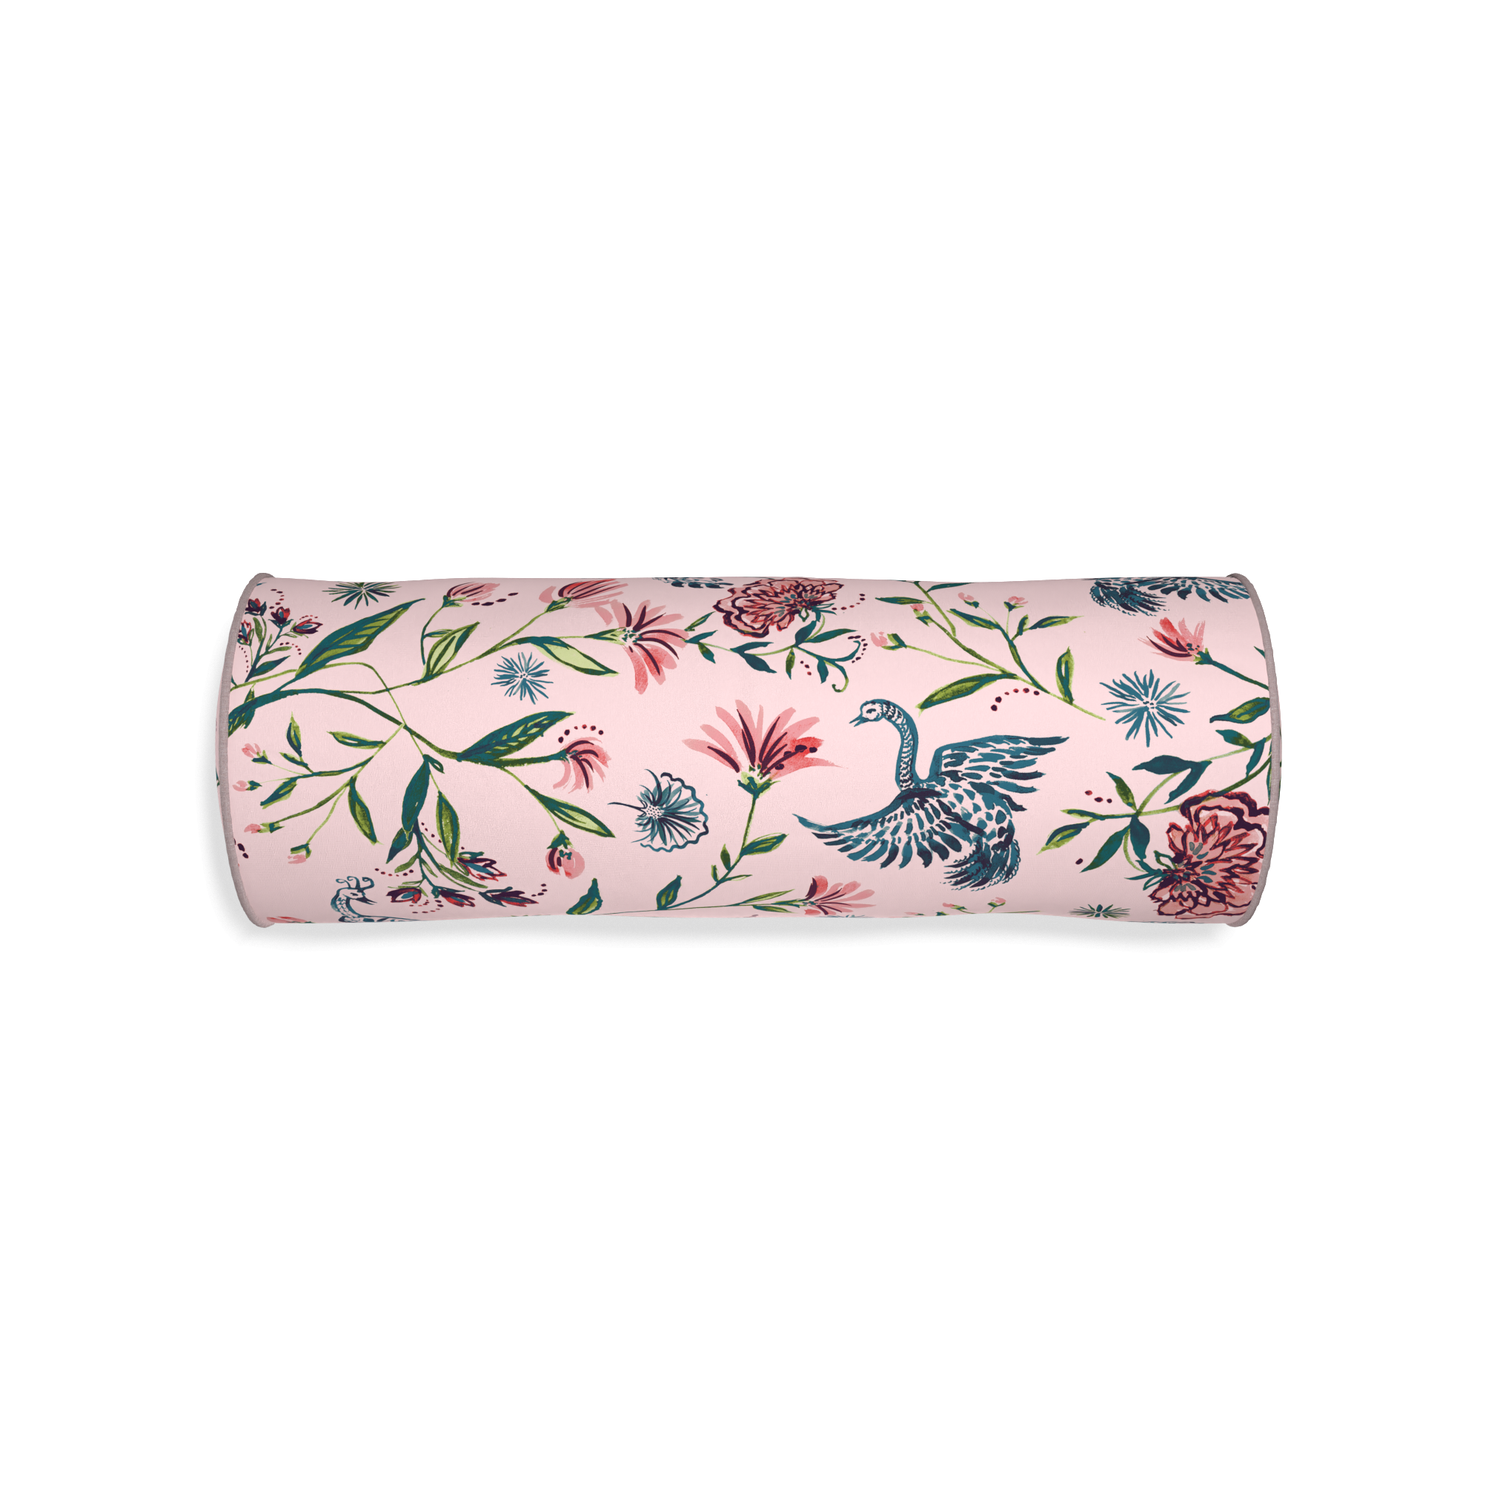 Bolster daphne rose custom rose chinoiseriepillow with orchid piping on white background